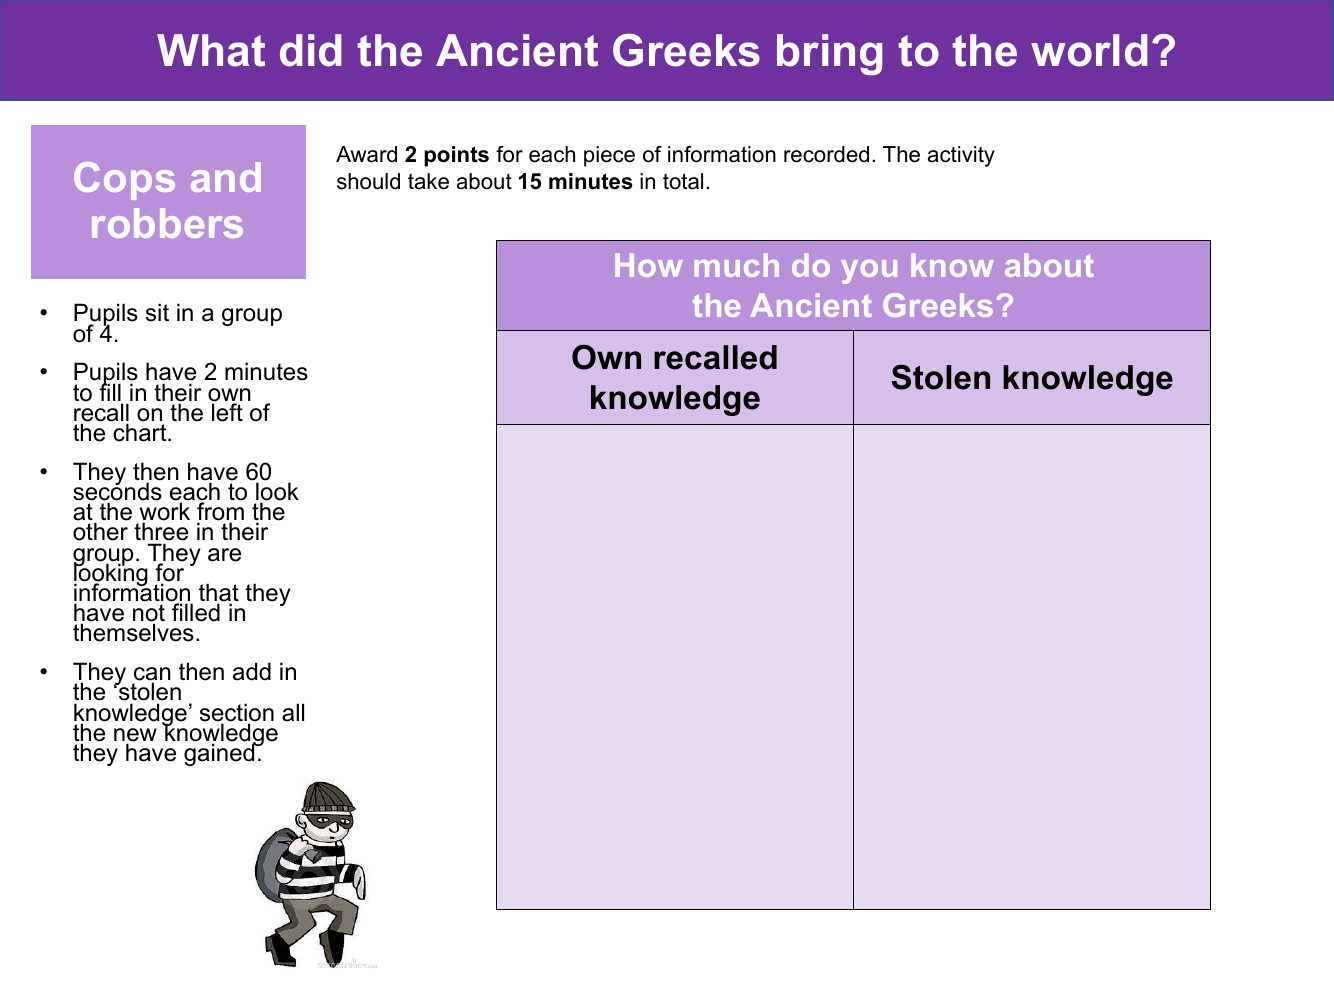 Cops and robbers - How much do you know about the Ancient Greeks?